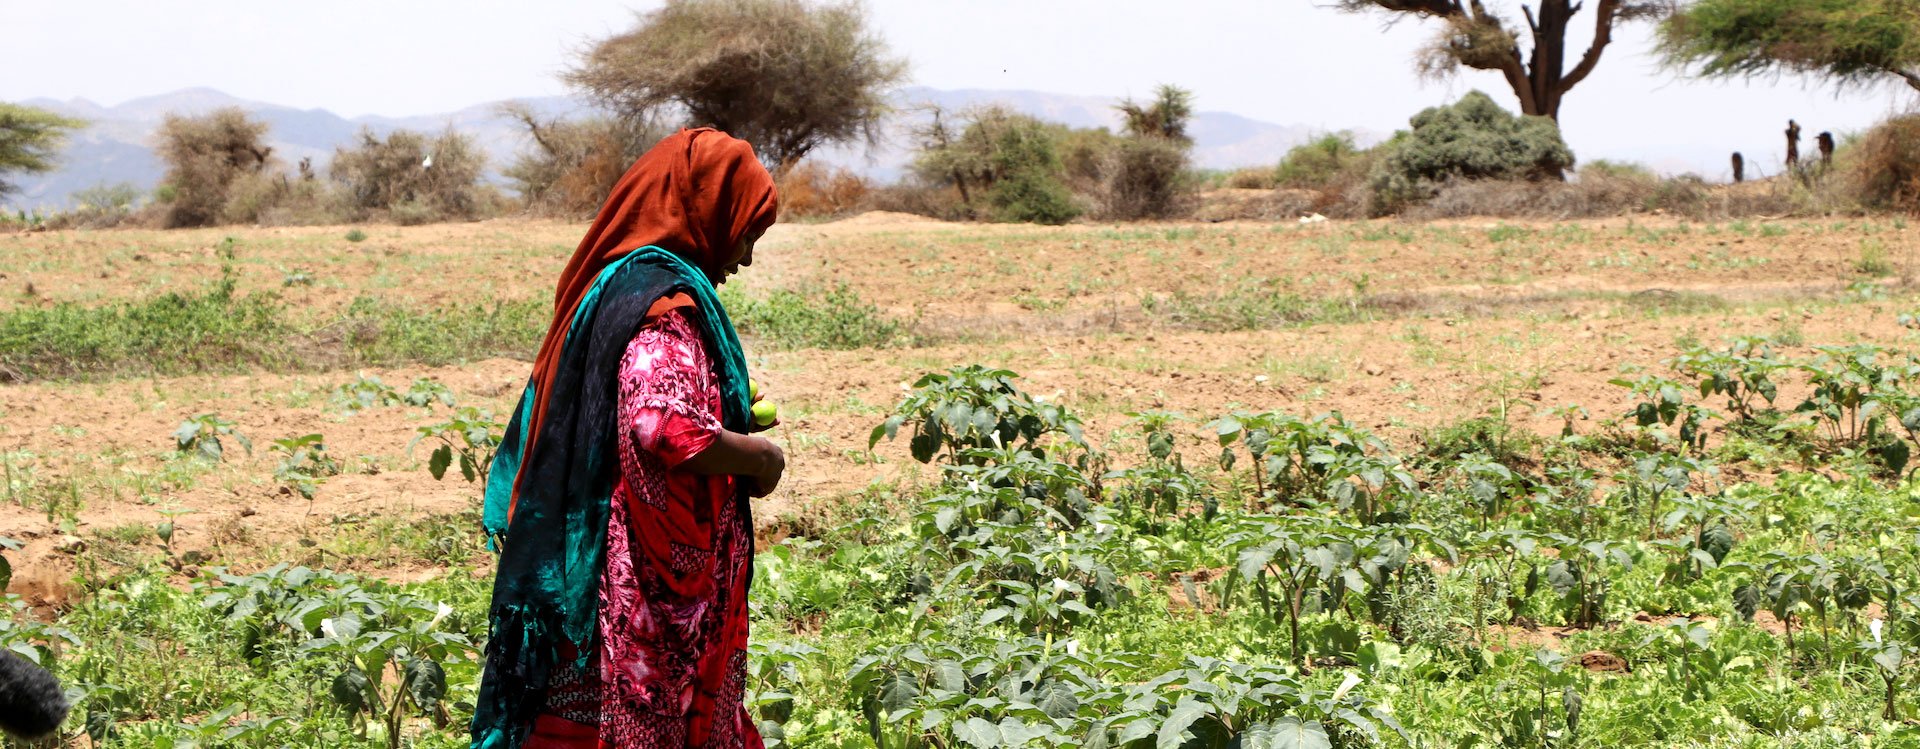 Crops grown from irrigation system near Ruqi village in Somaliland